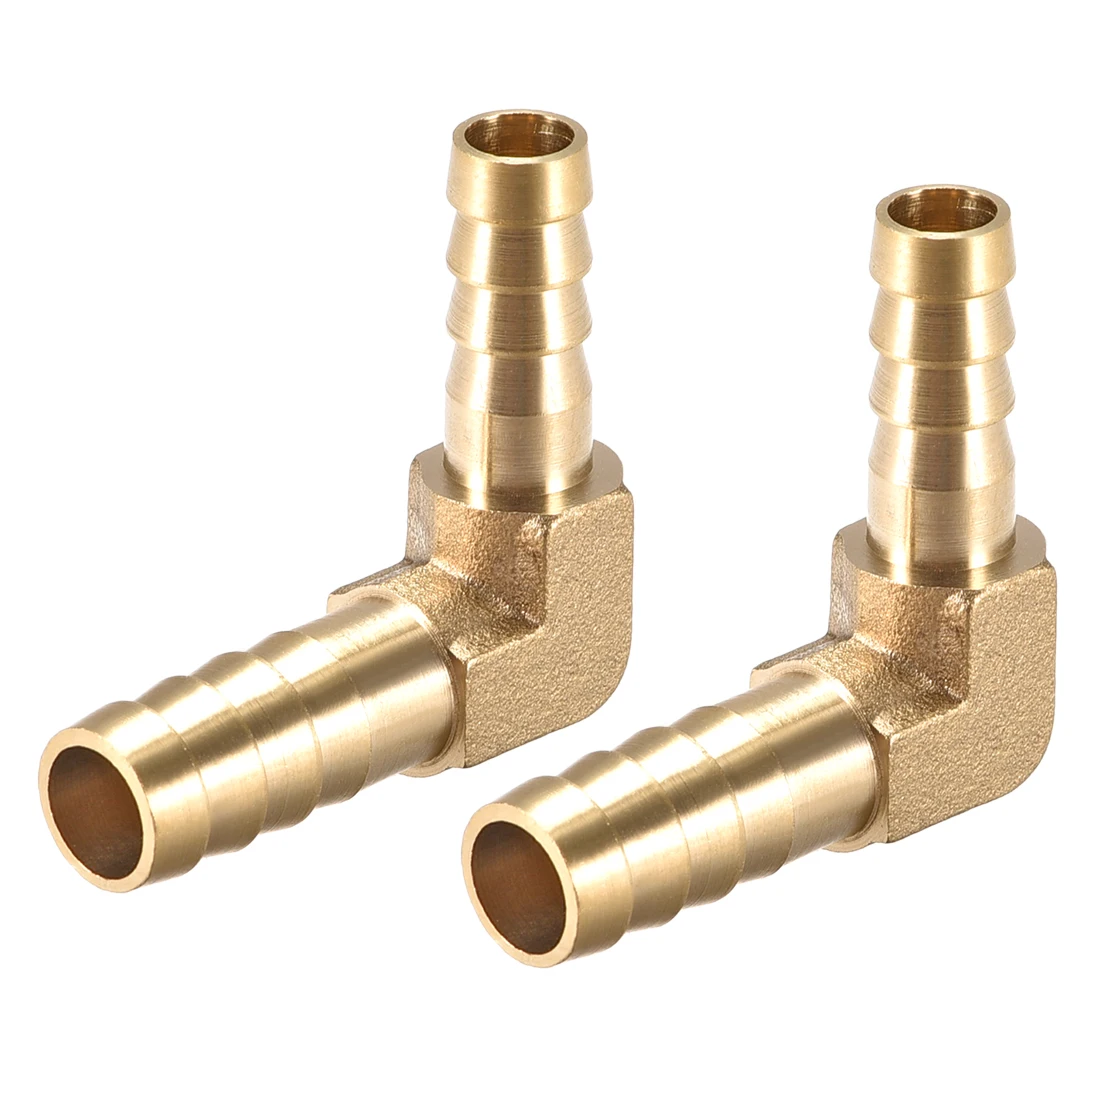 

uxcell 2pcs 10mm To 8mm Barb Brass Hose Fitting 90 Degree Elbow Pipe Connector Coupler Tubing Adapter for air, water, fuel